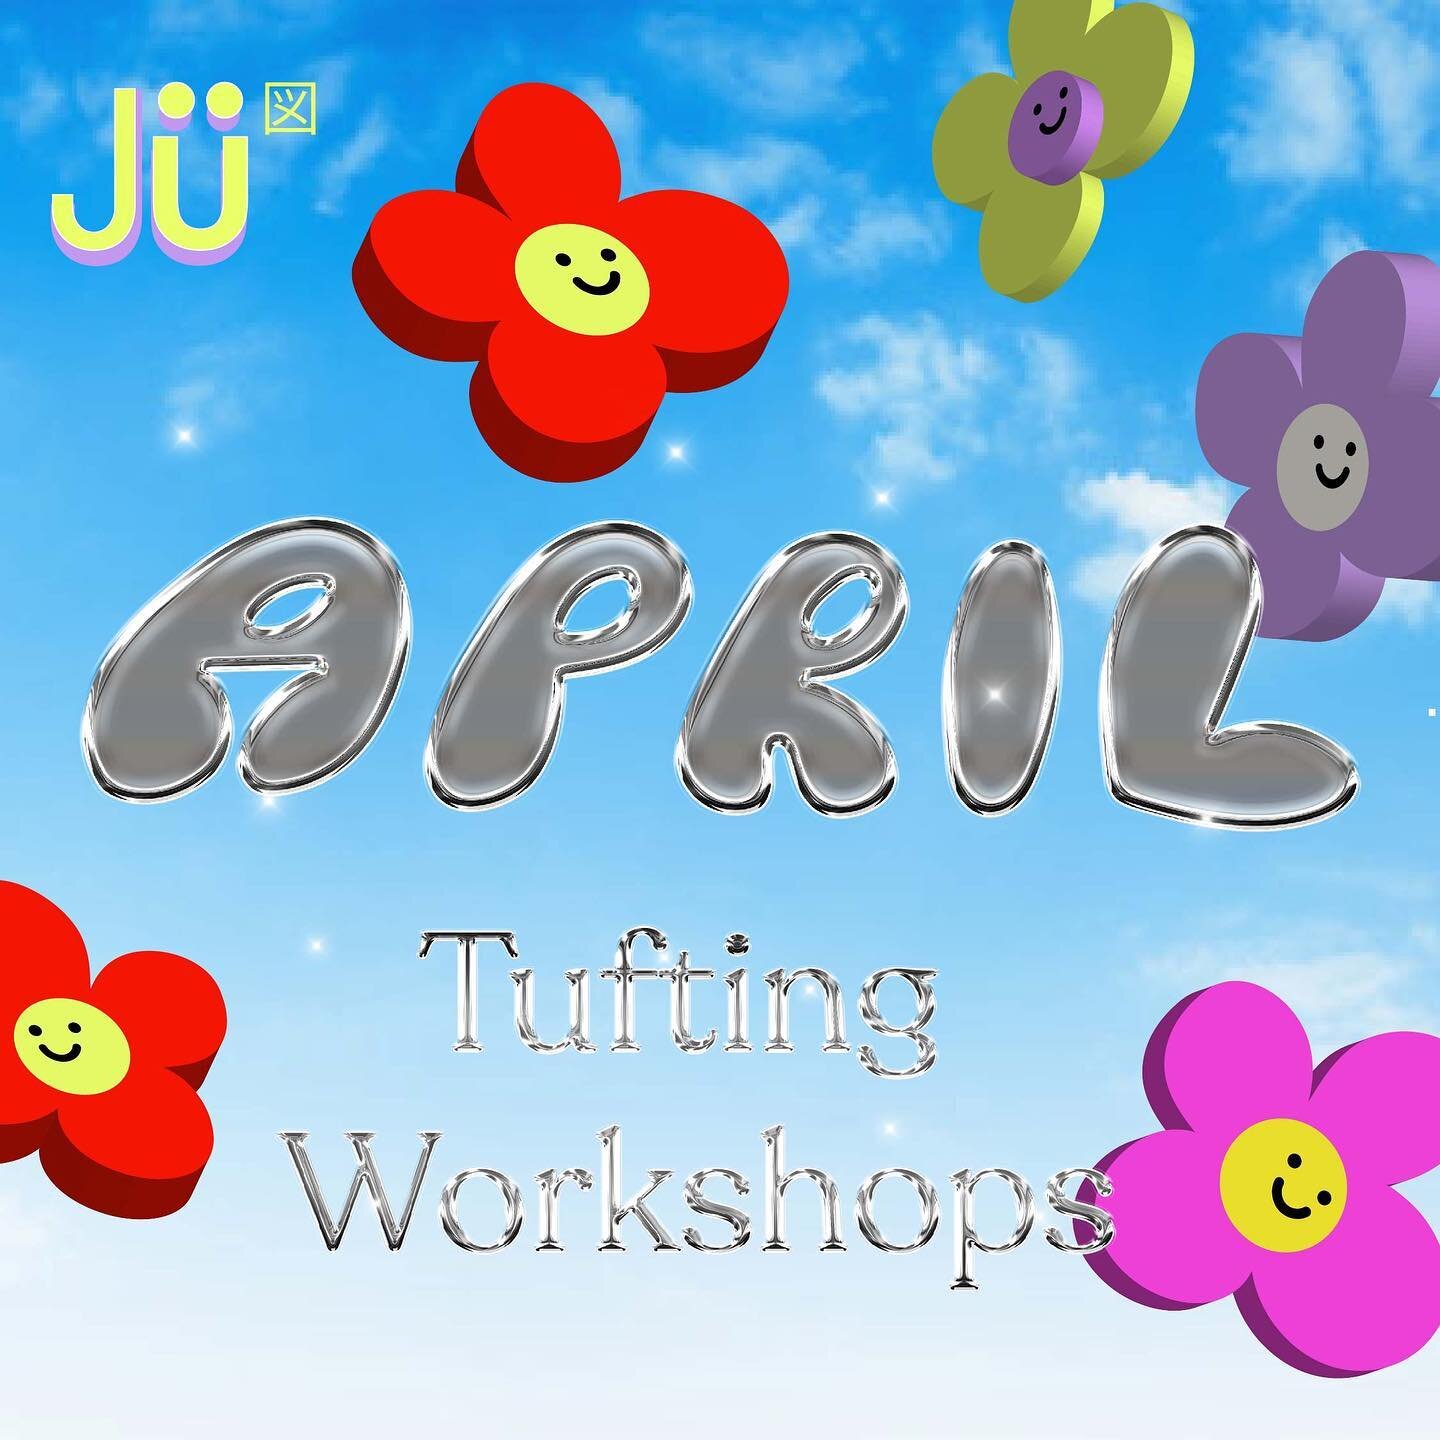 🌸🙂 TUFTING WORKSHOPS APRIL 💙🐣 link in BIO 🐣

Come by at @contemporaryartstudio.bcn to make your own custom rug 🔫
We have different workshops like 45x45 cm rugs, tufted pillowcases and soon tufted mirrors &hellip; 😮&zwj;💨

P&aacute;sate a @con